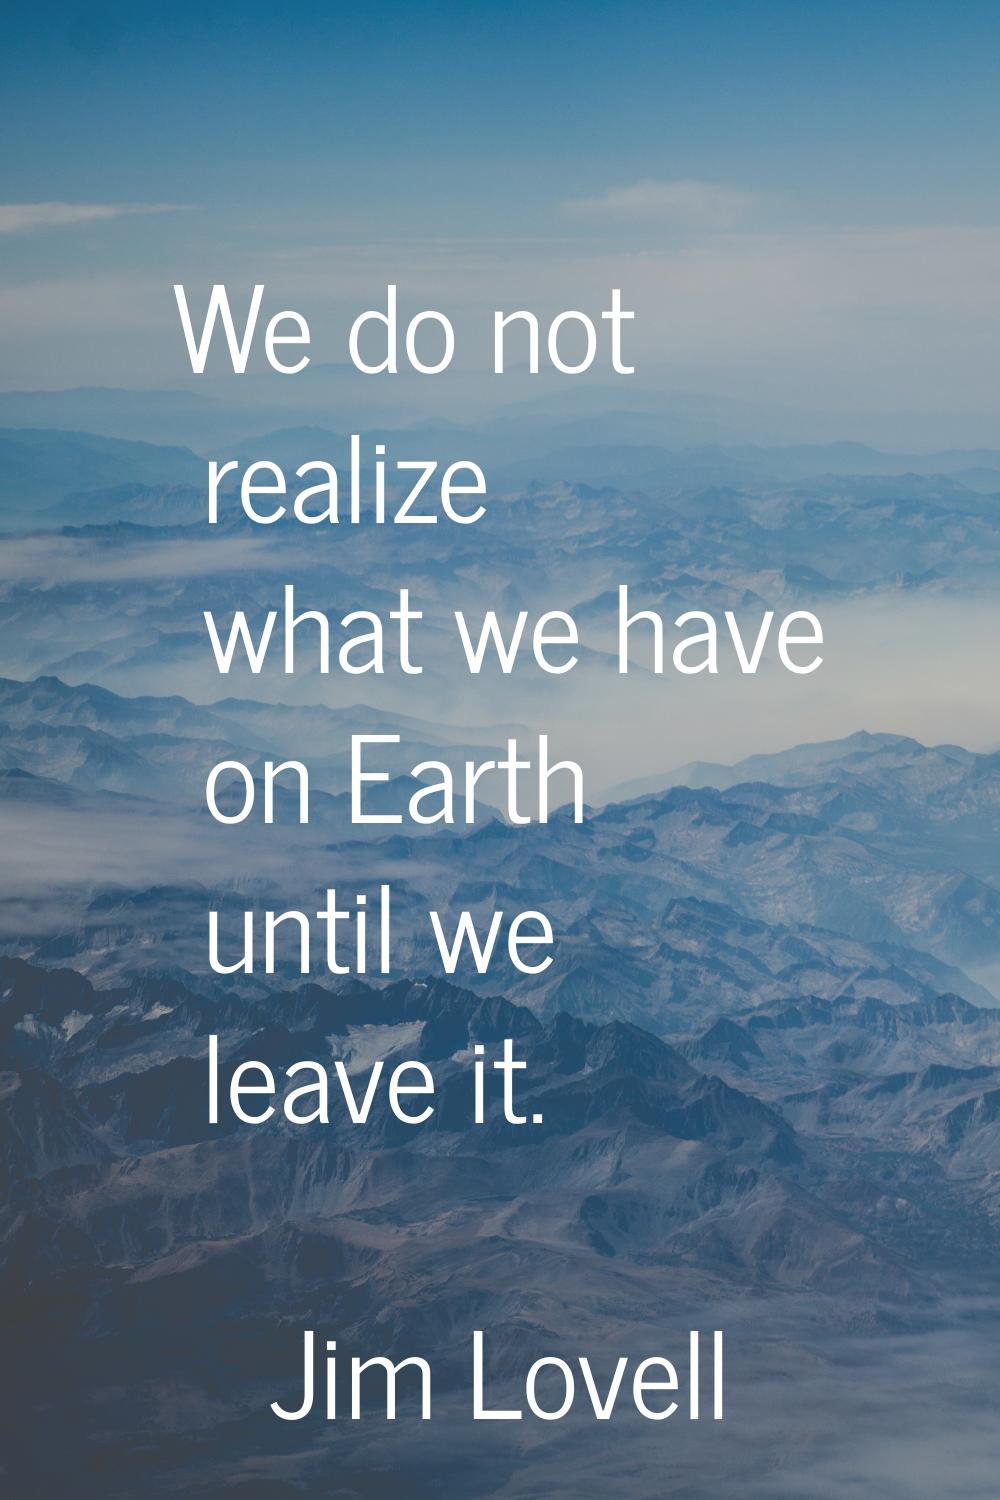 We do not realize what we have on Earth until we leave it.